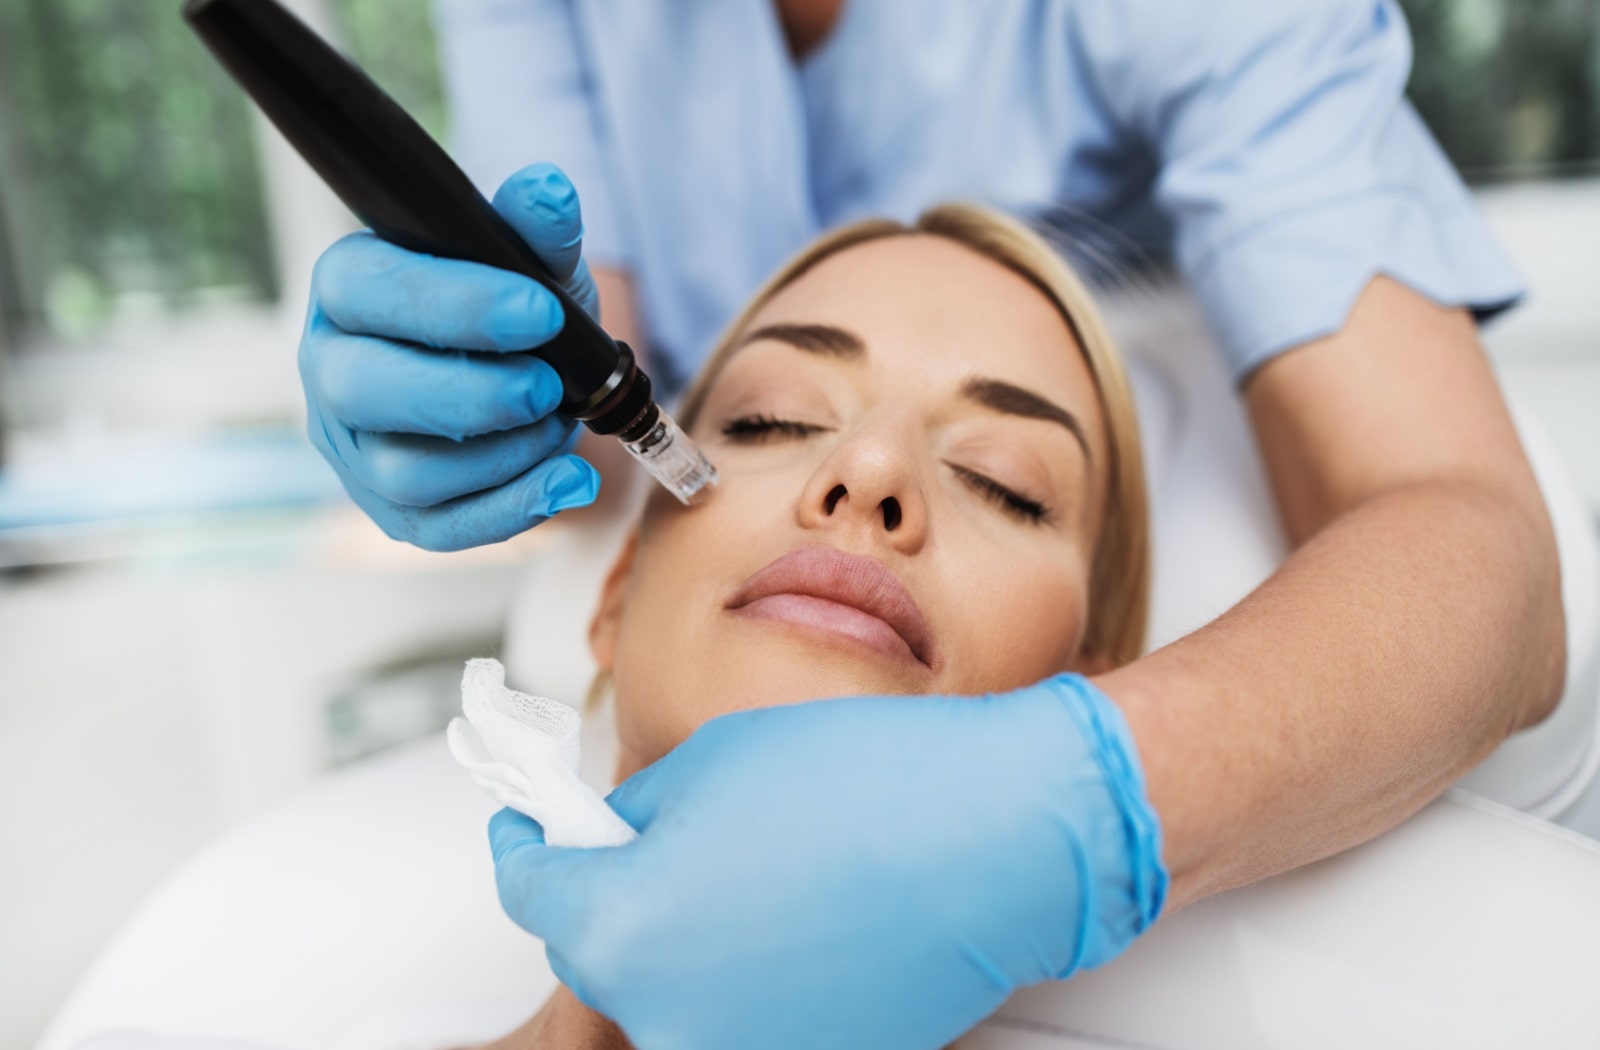 A woman receiving microneedling treatment from a professional esthetician